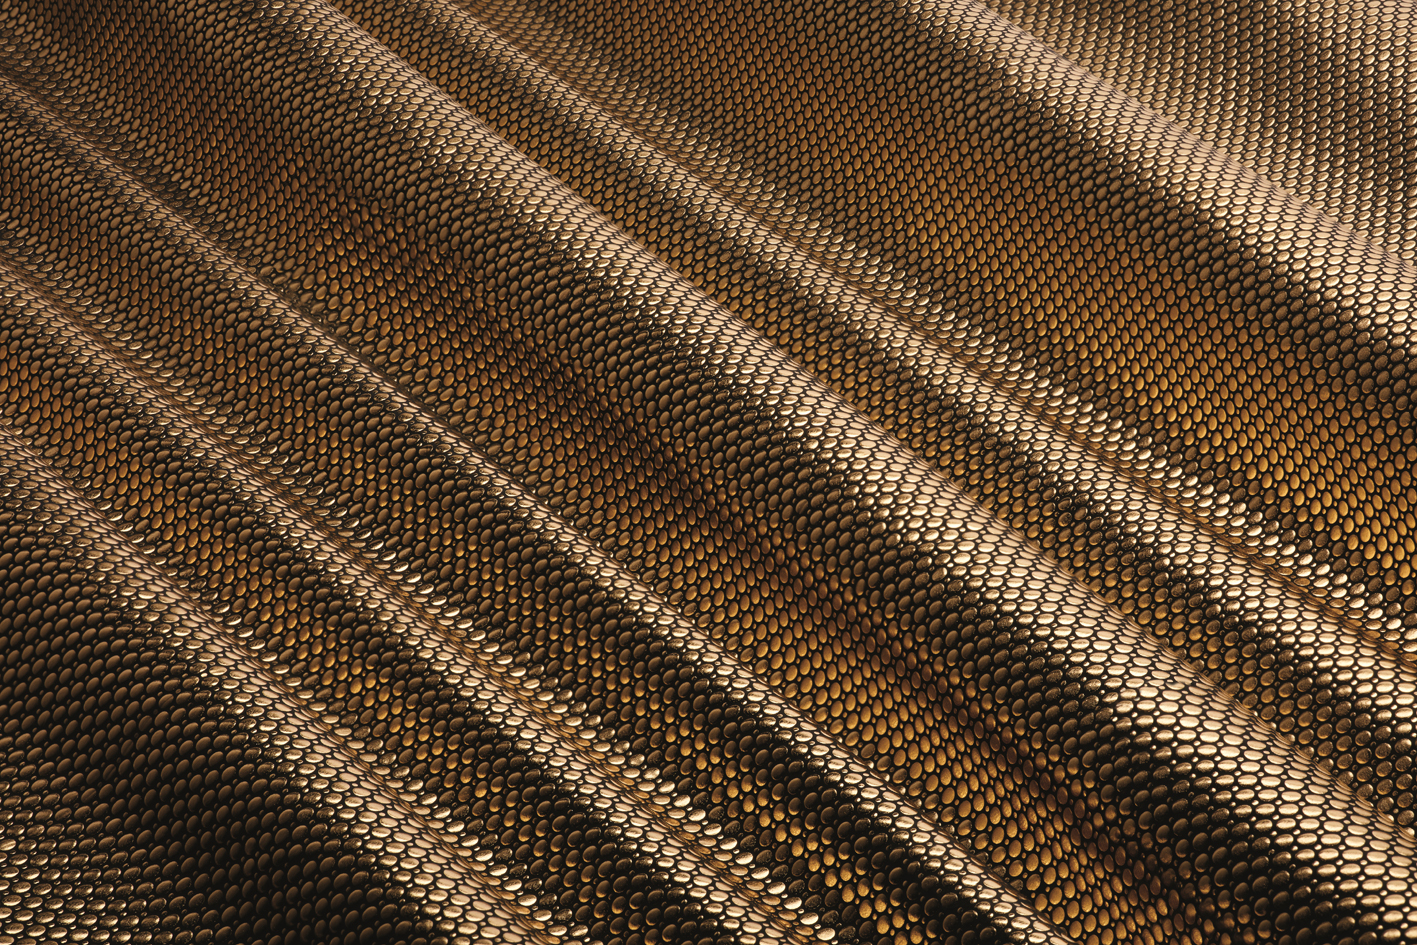 Enhanced pattern of gold metallic dots reflects and retains natural body heat. © Columbia